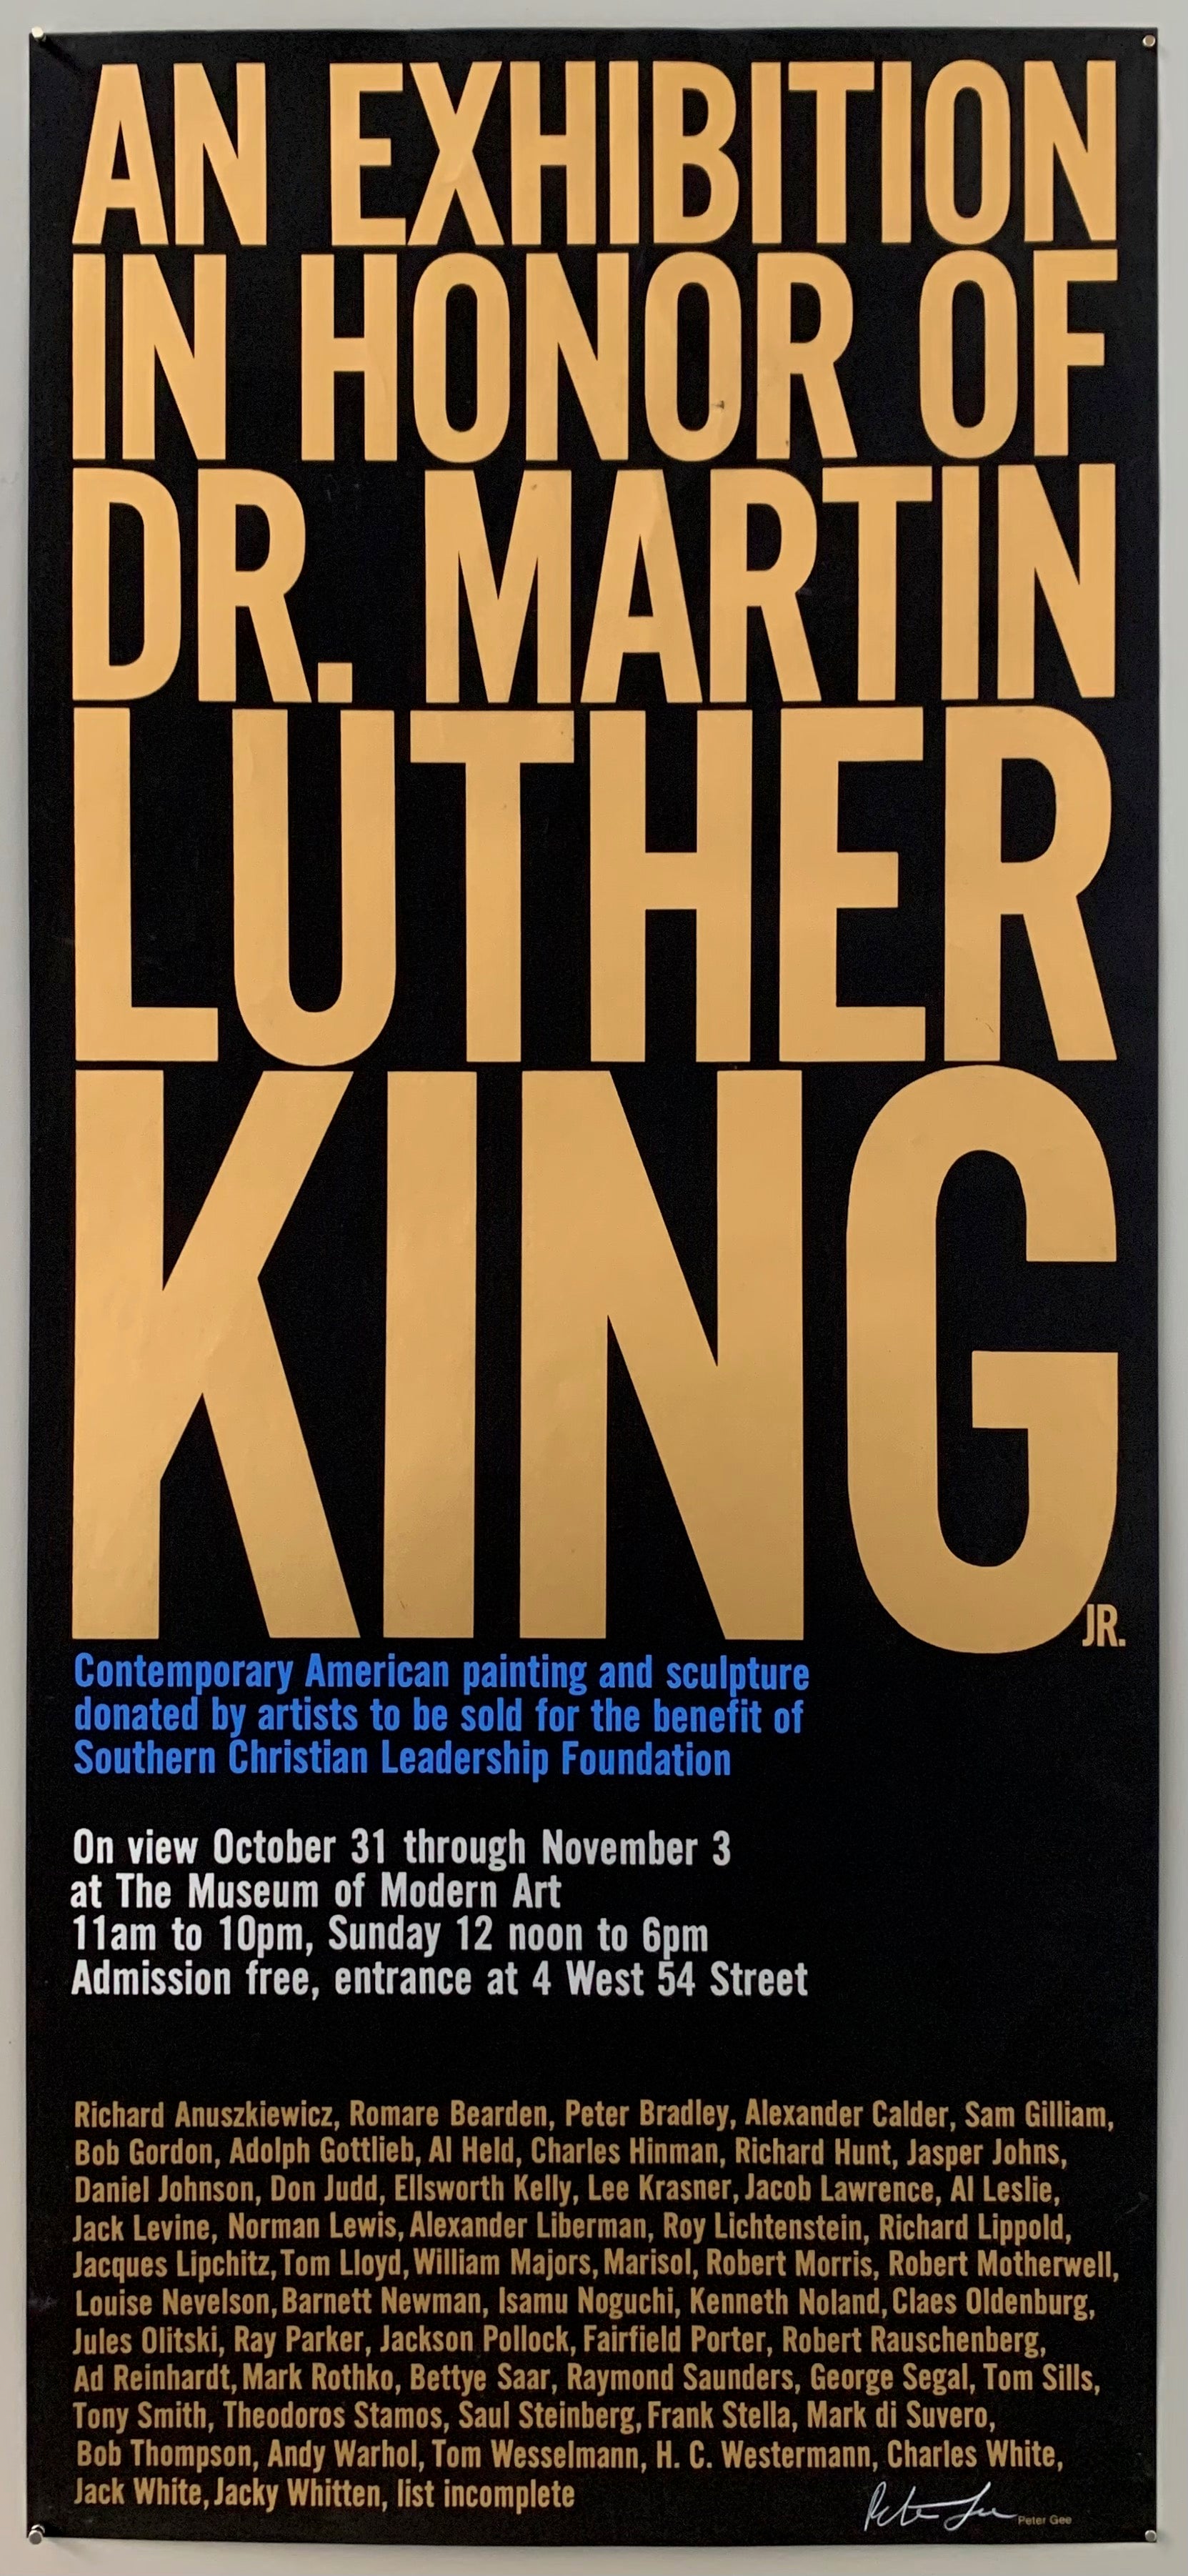 Poster for a MoMa exhibit in honor of Martin Luther King Jr.